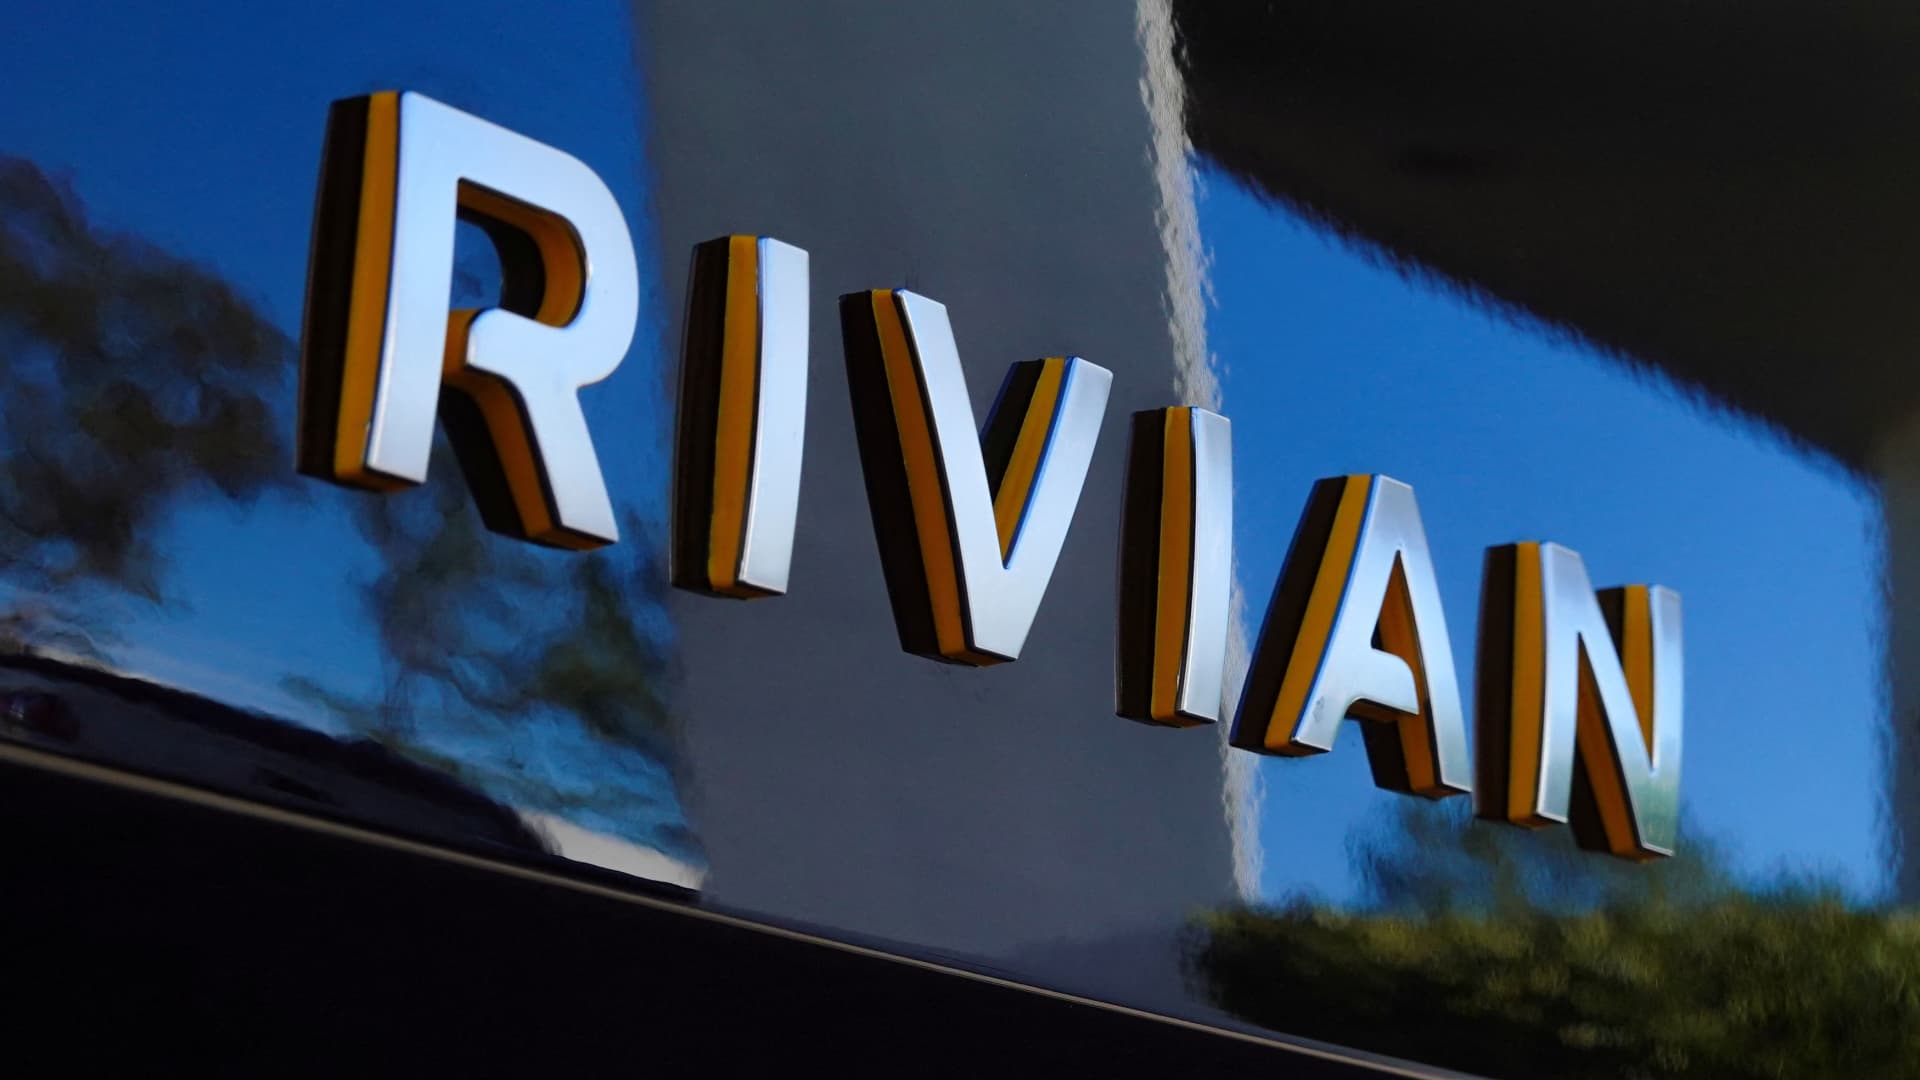 Jim Cramer thinks Rivian is a worth a look for investors looking to buy an EV stock Auto Recent